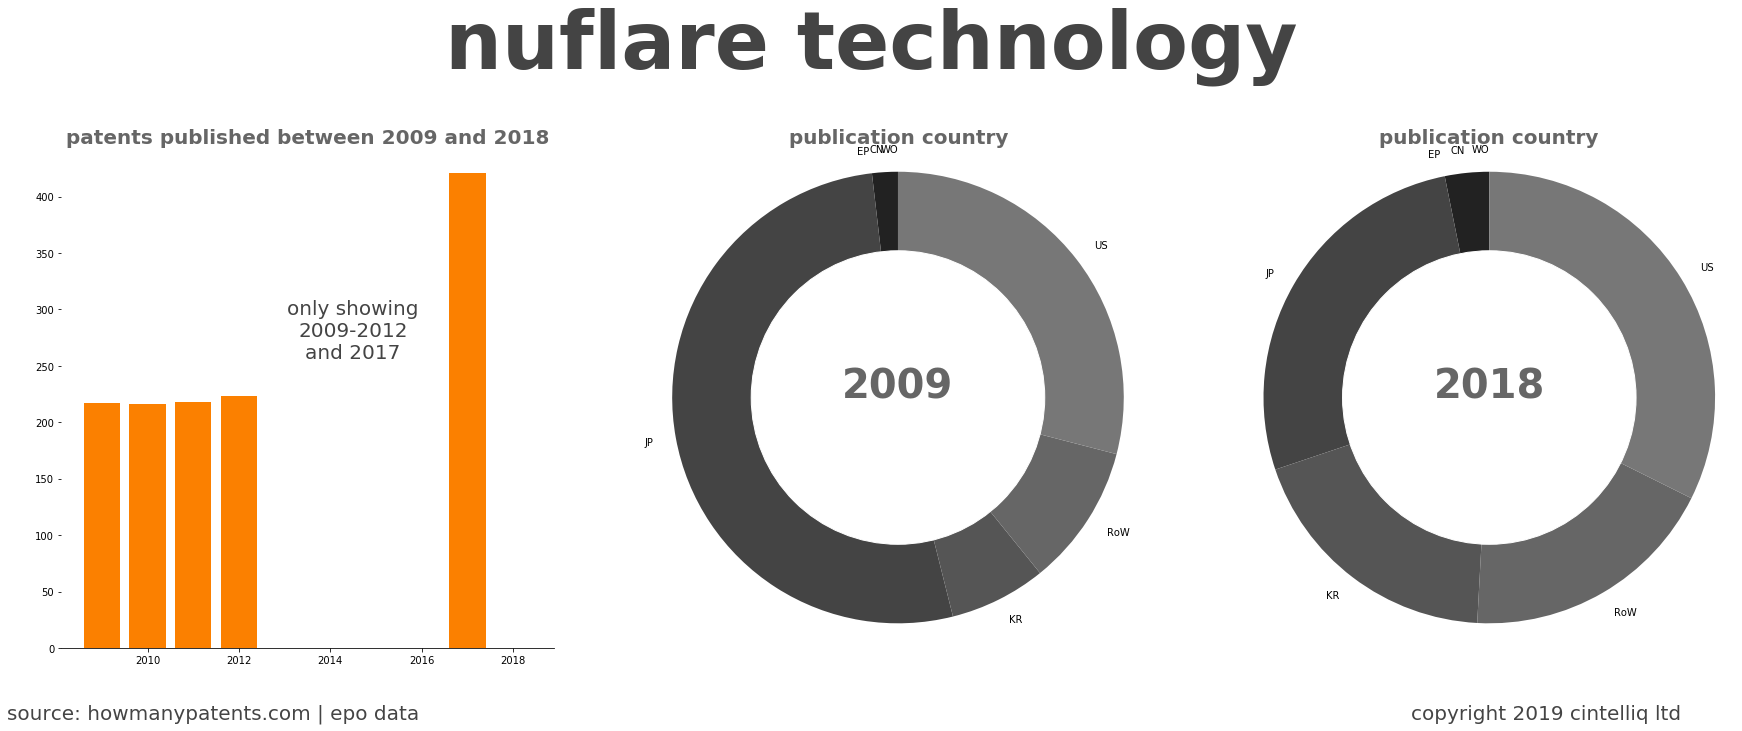 summary of patents for Nuflare Technology